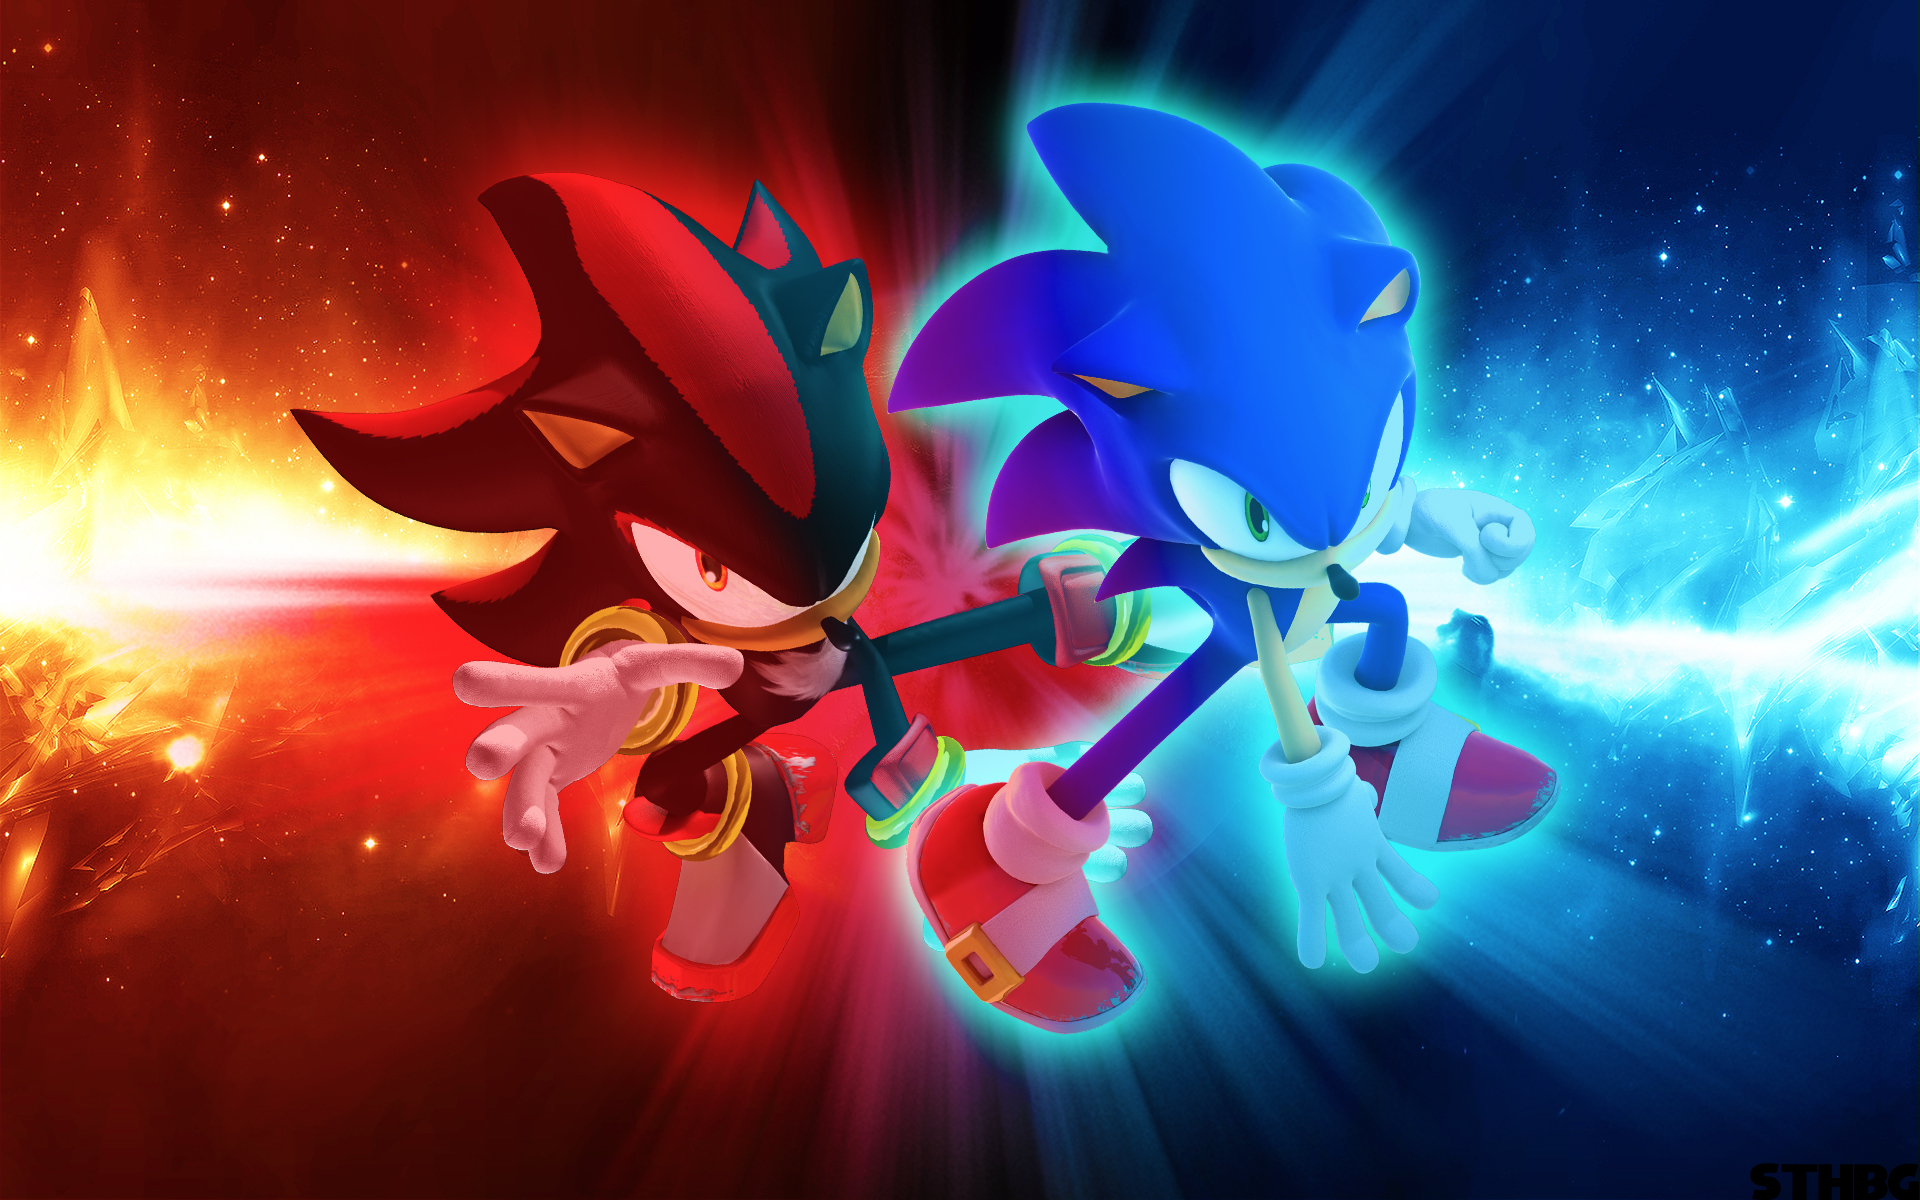 Free Download Sonic And Shadow Wallpaper By Sonicthehedgehogbg 19x10 For Your Desktop Mobile Tablet Explore 48 Sonic Wallpaper For Computer Sonic 3 Wallpaper Sonic The Hedgehog Desktop Wallpaper Sonic The Hedgehog Wallpaper